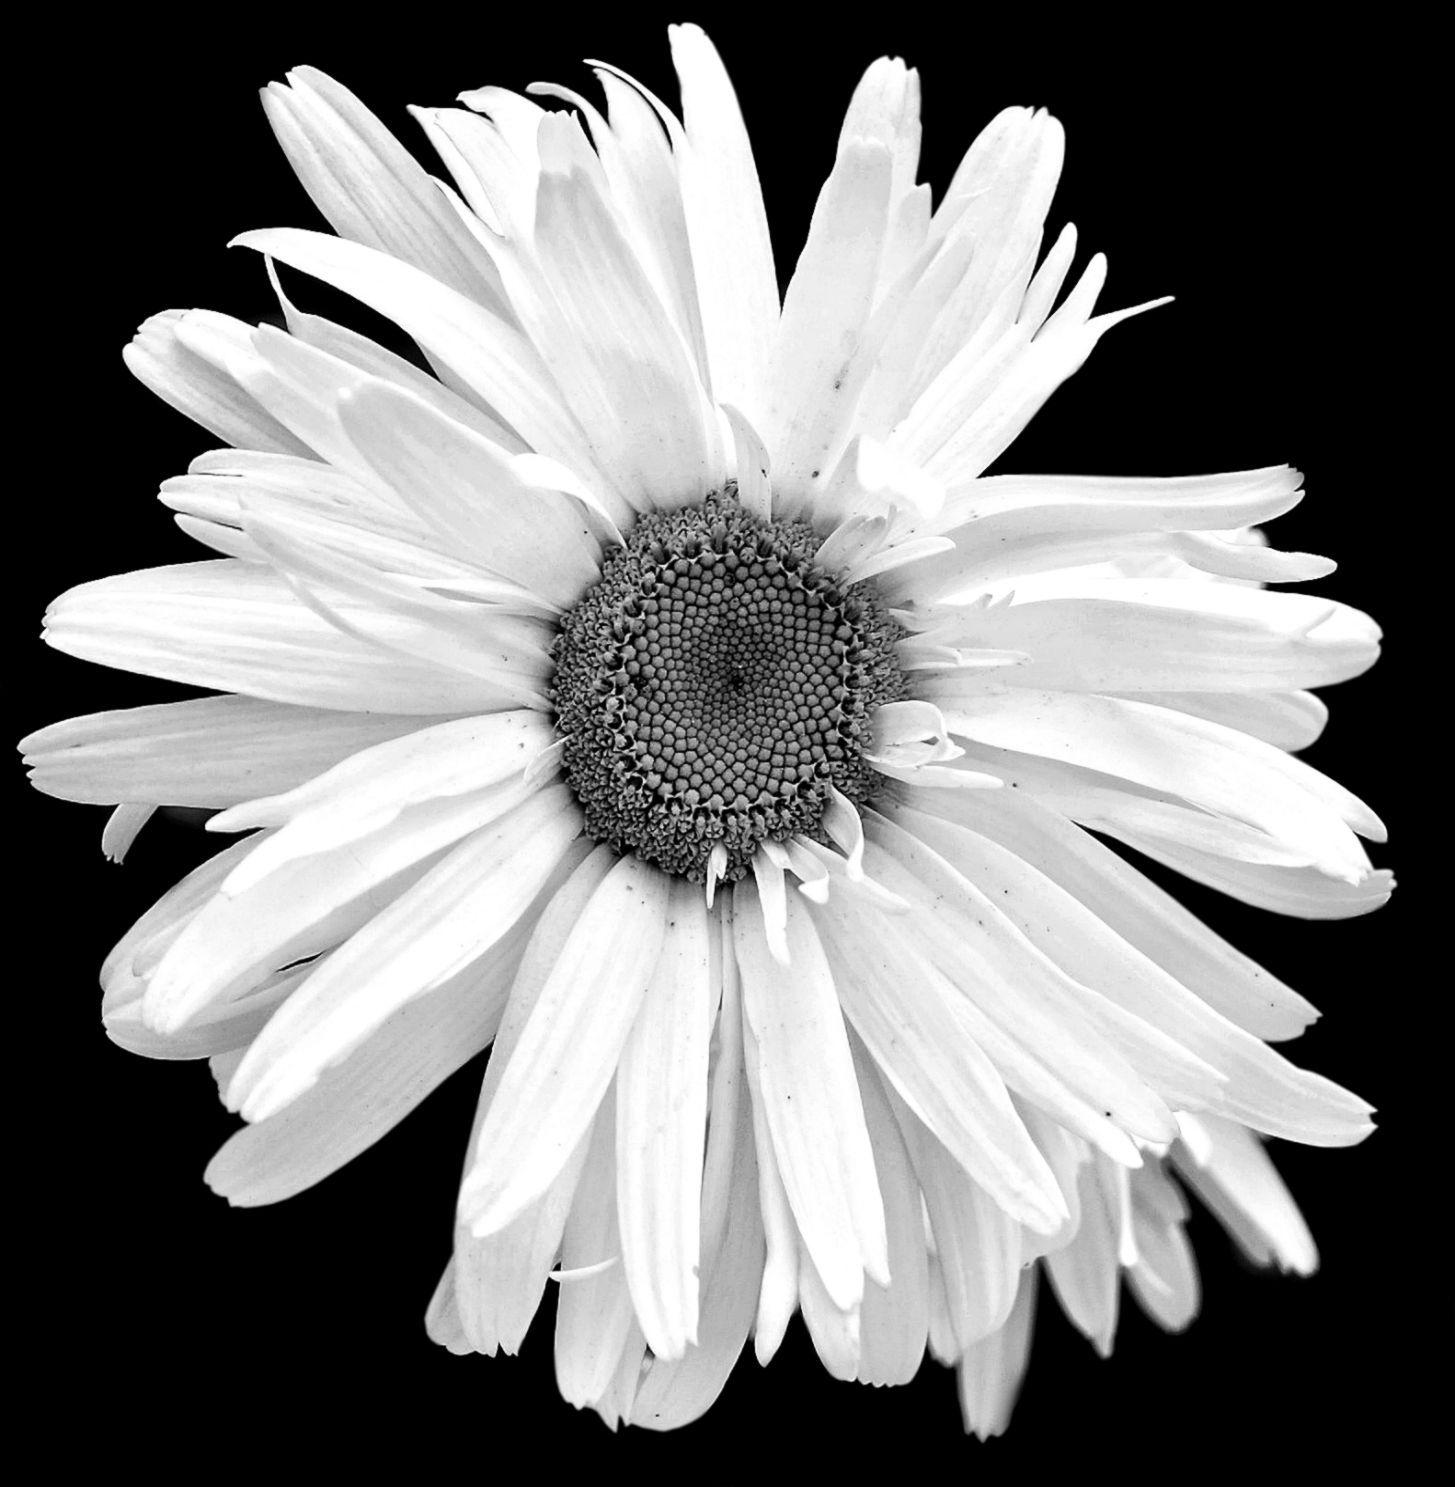 Black and White Daisy Wallpapers - Top Free Black and White Daisy ...